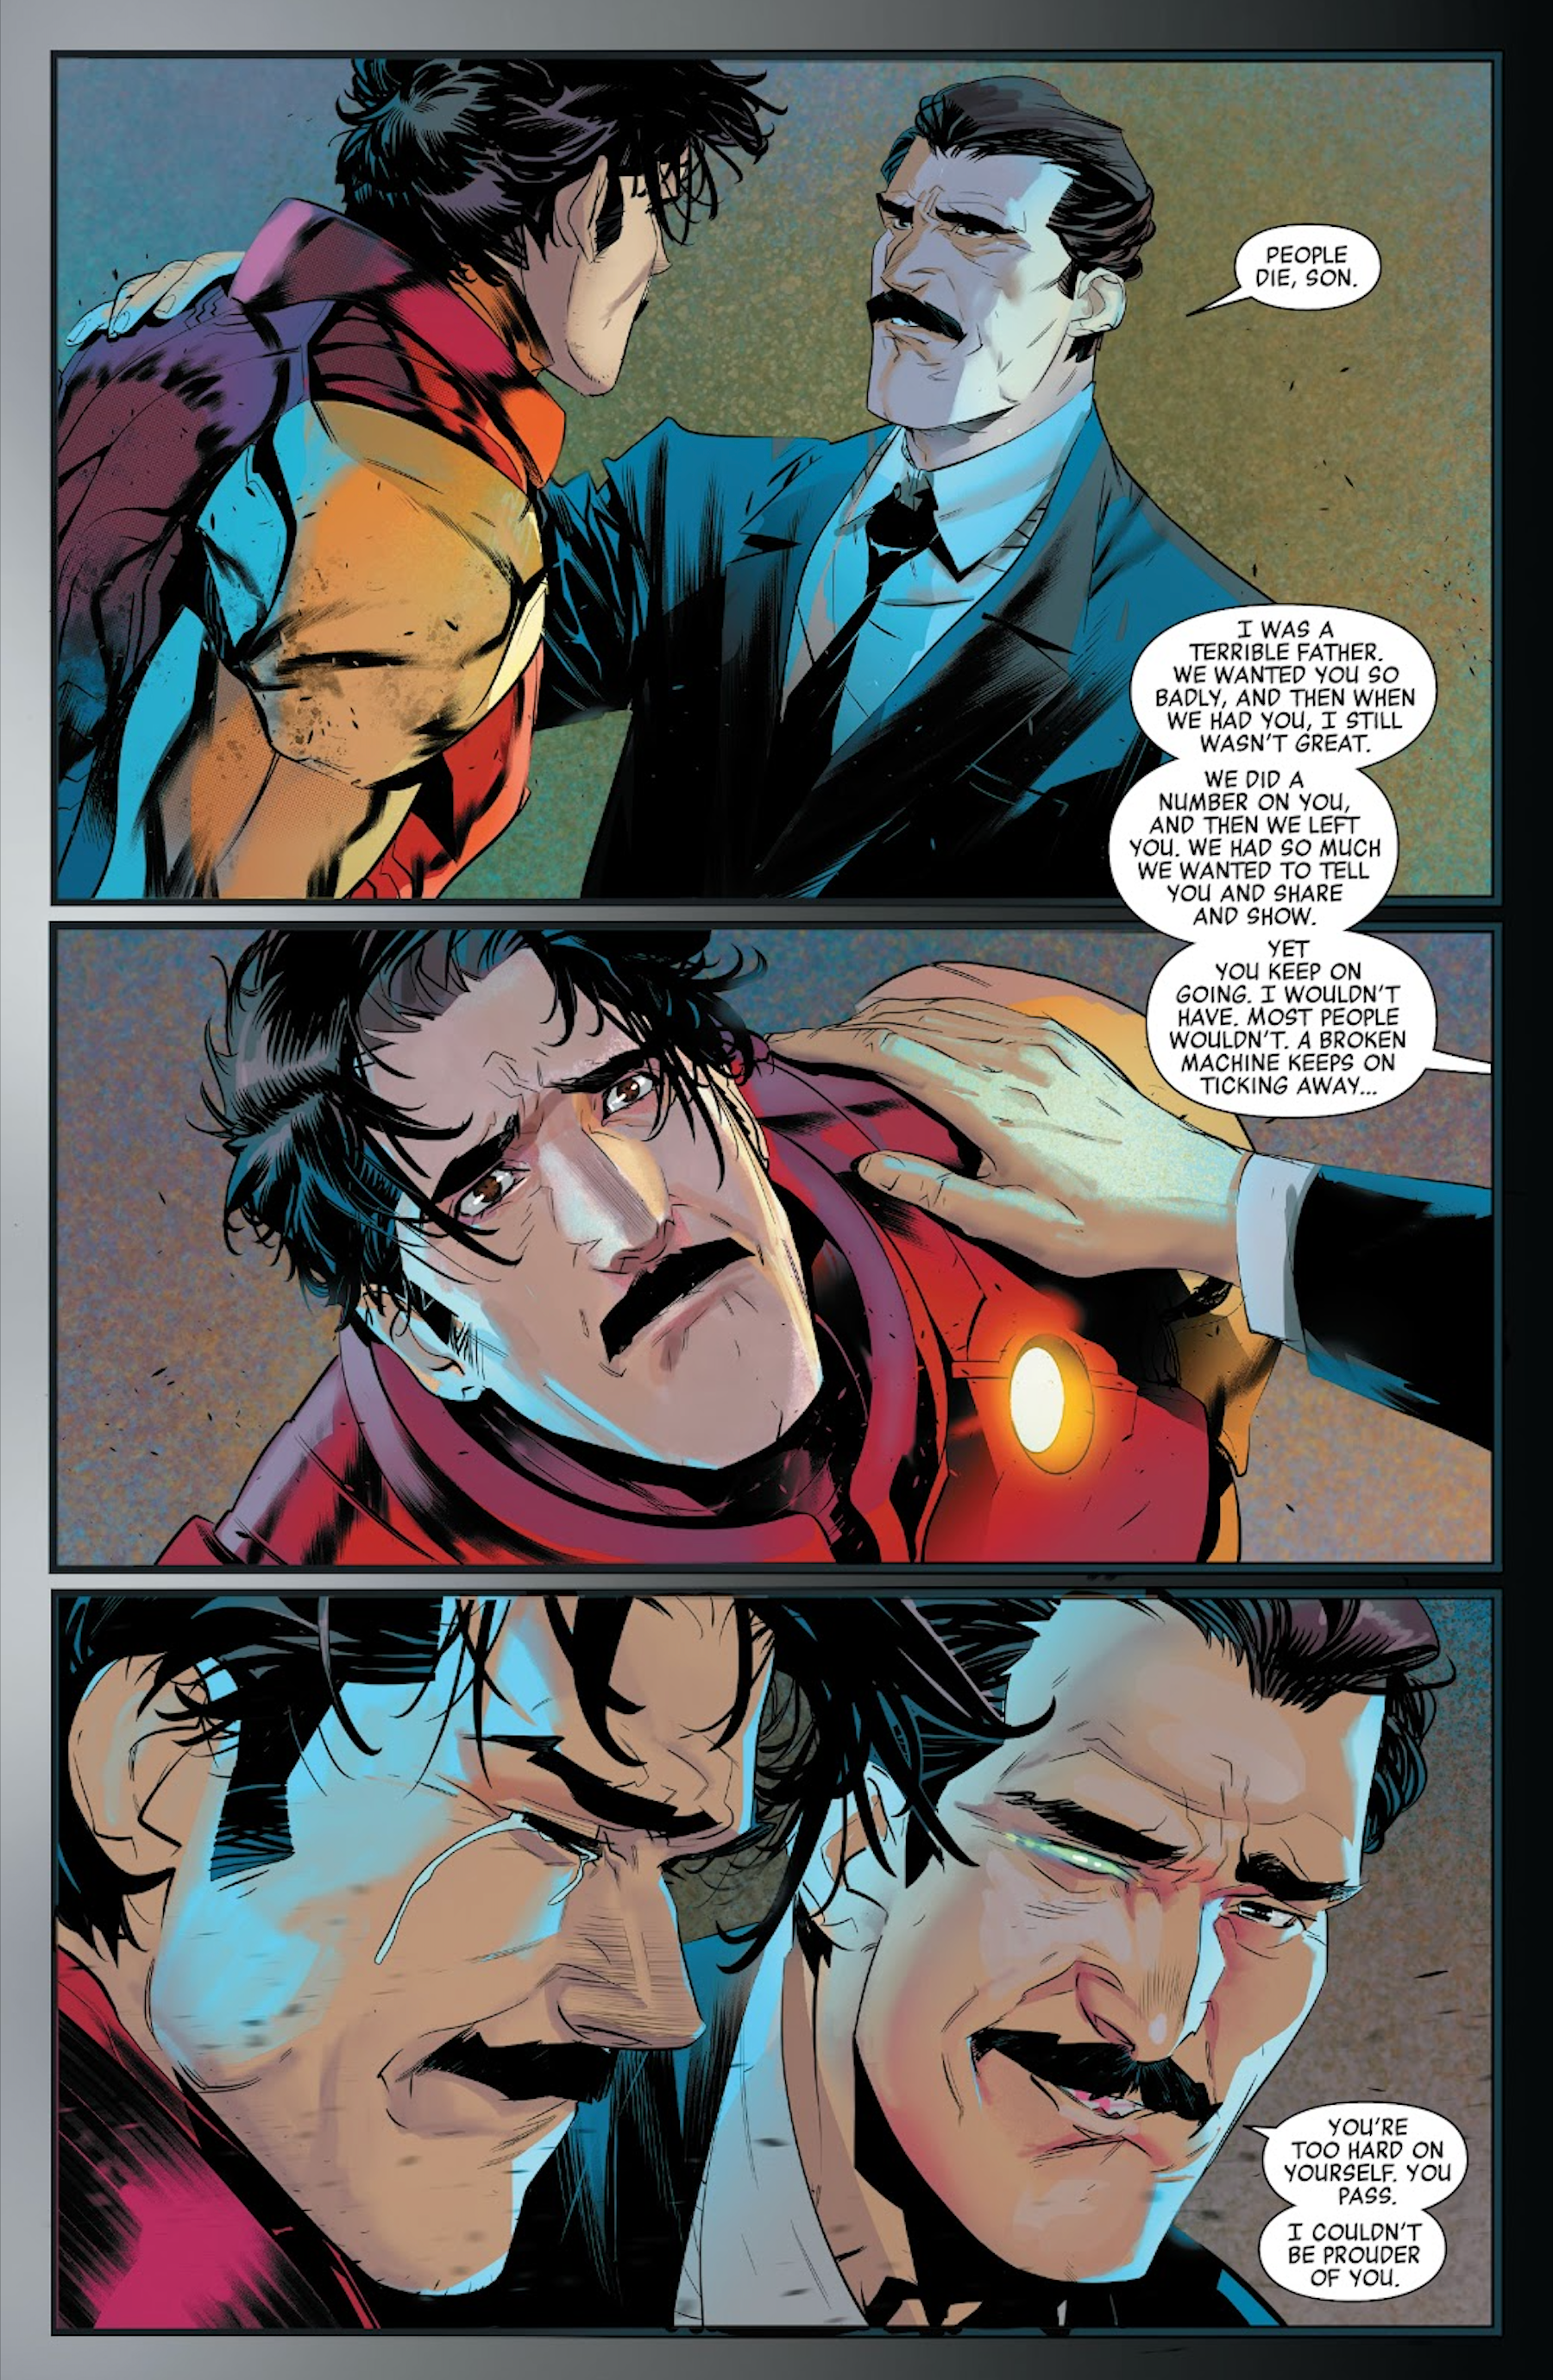 Iron Man meets his father Howard Stark